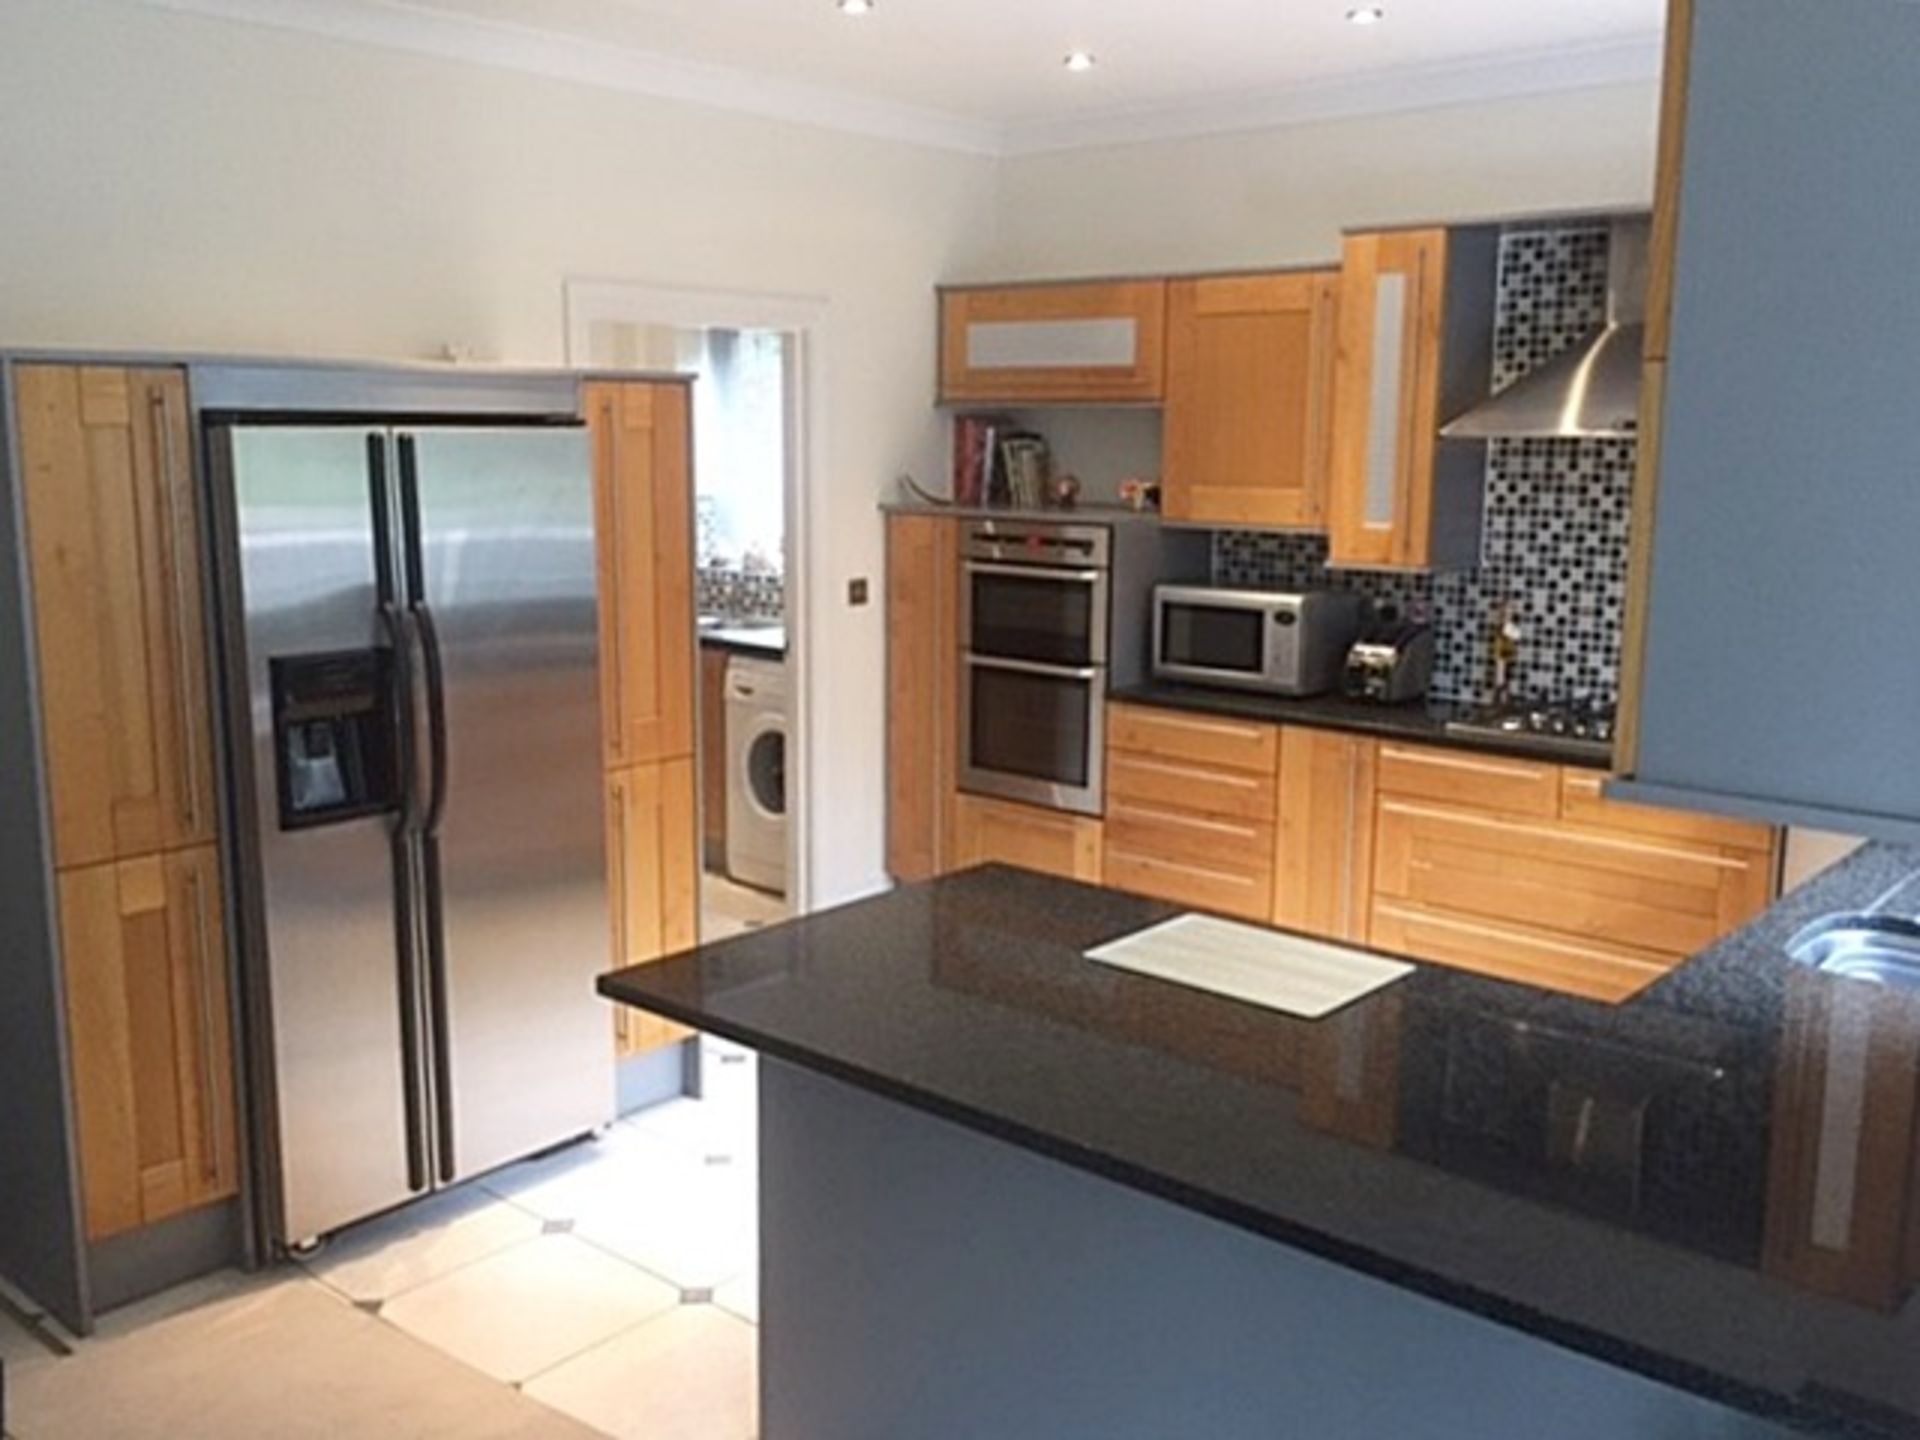 1 x Solid Wood Fitted Kitchen By Panorama - Features Luxurious Black Granite Worktops, Integrated - Image 5 of 31